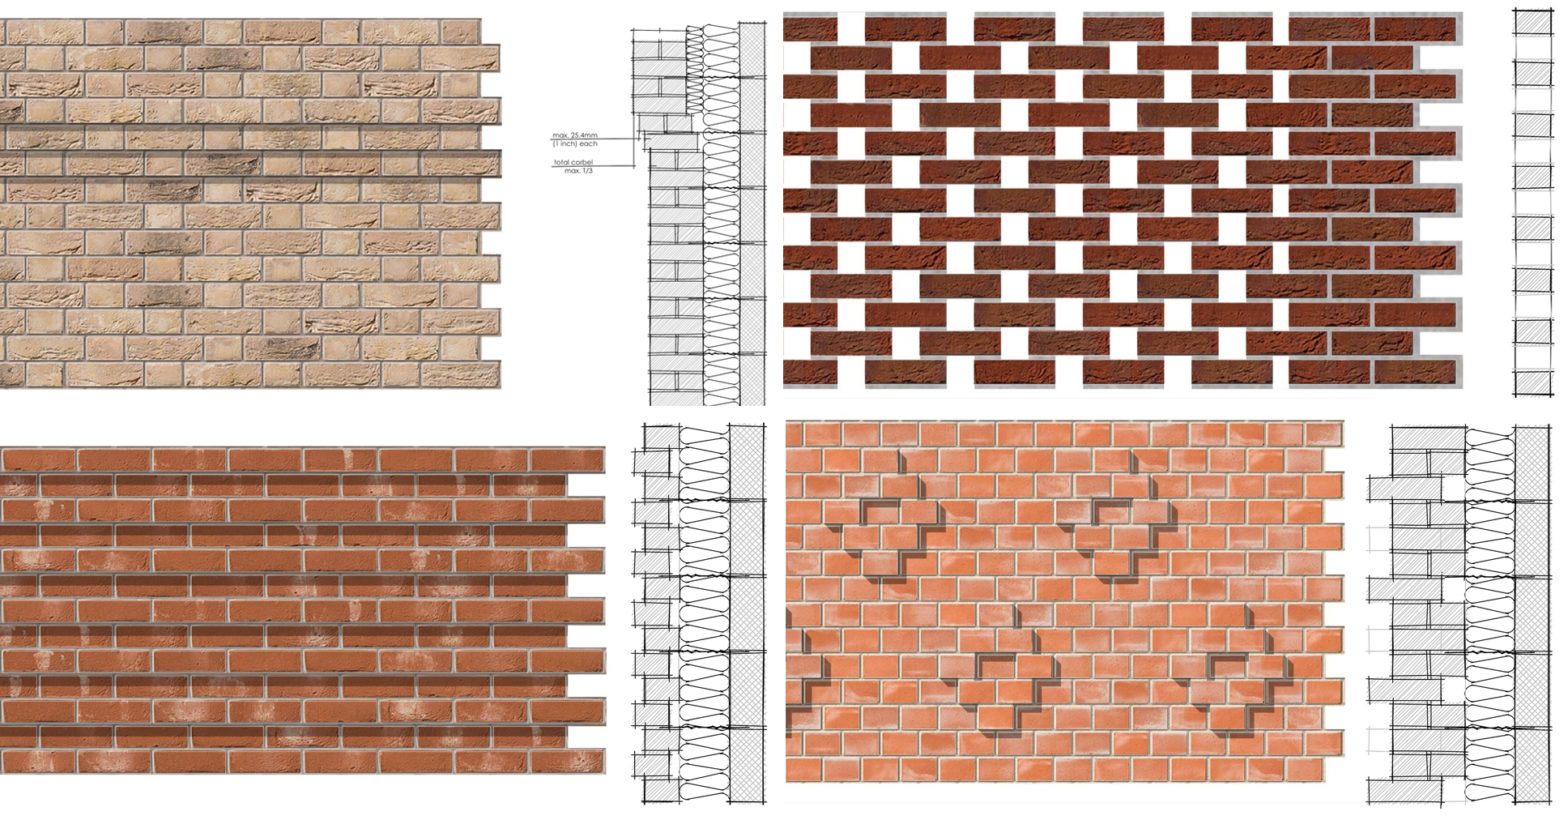 Technical Details: An Architect’s Guide to Brick Bonds and Patterns